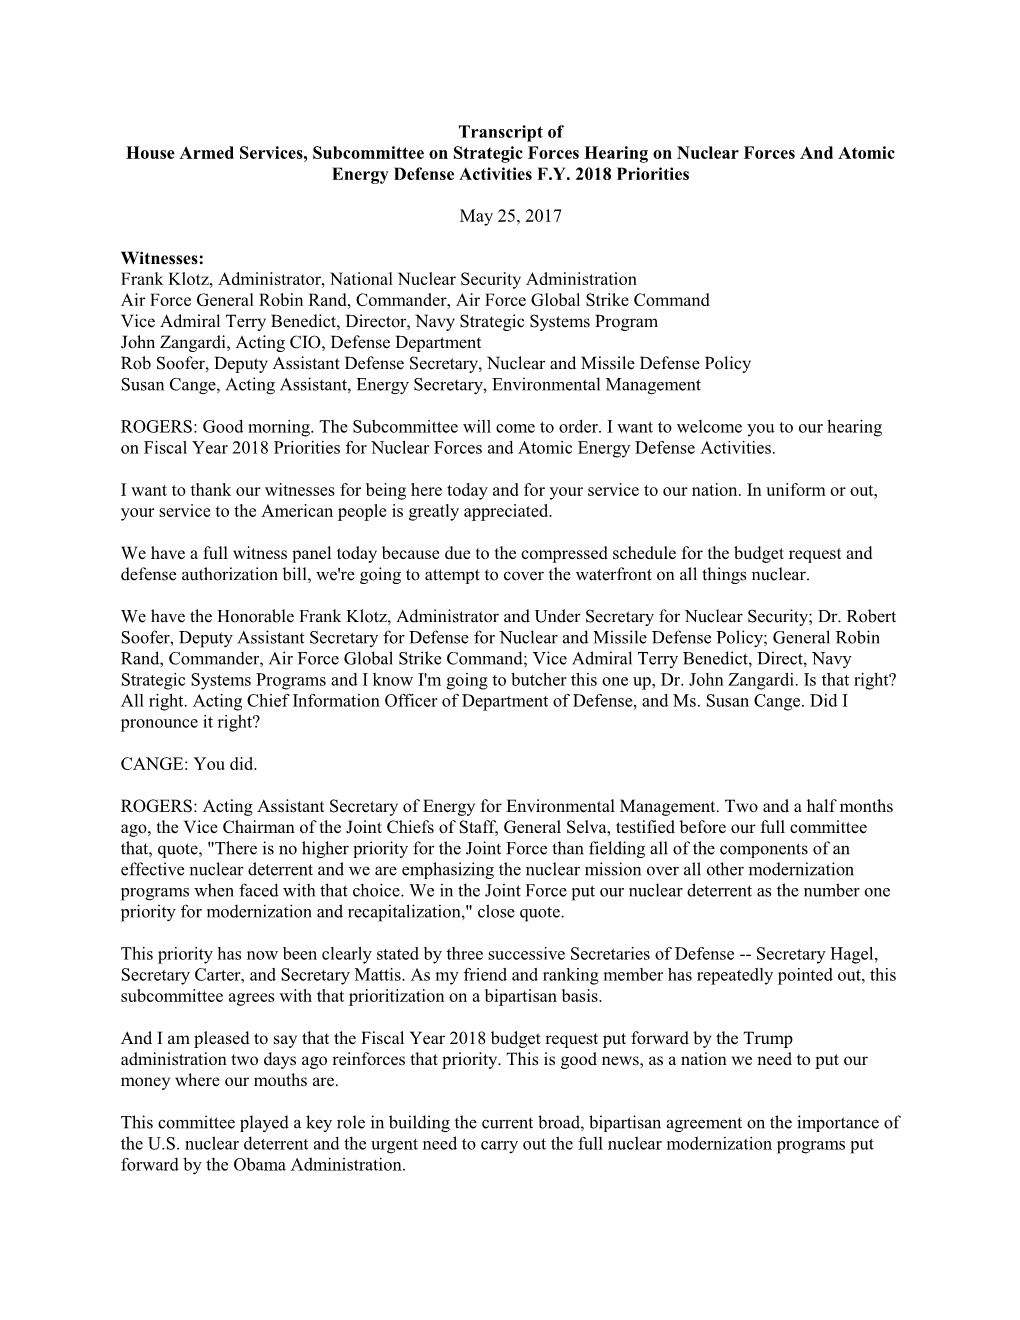 Transcript of House Armed Services, Subcommittee on Strategic Forces Hearing on Nuclear Forces and Atomic Energy Defense Activities F.Y